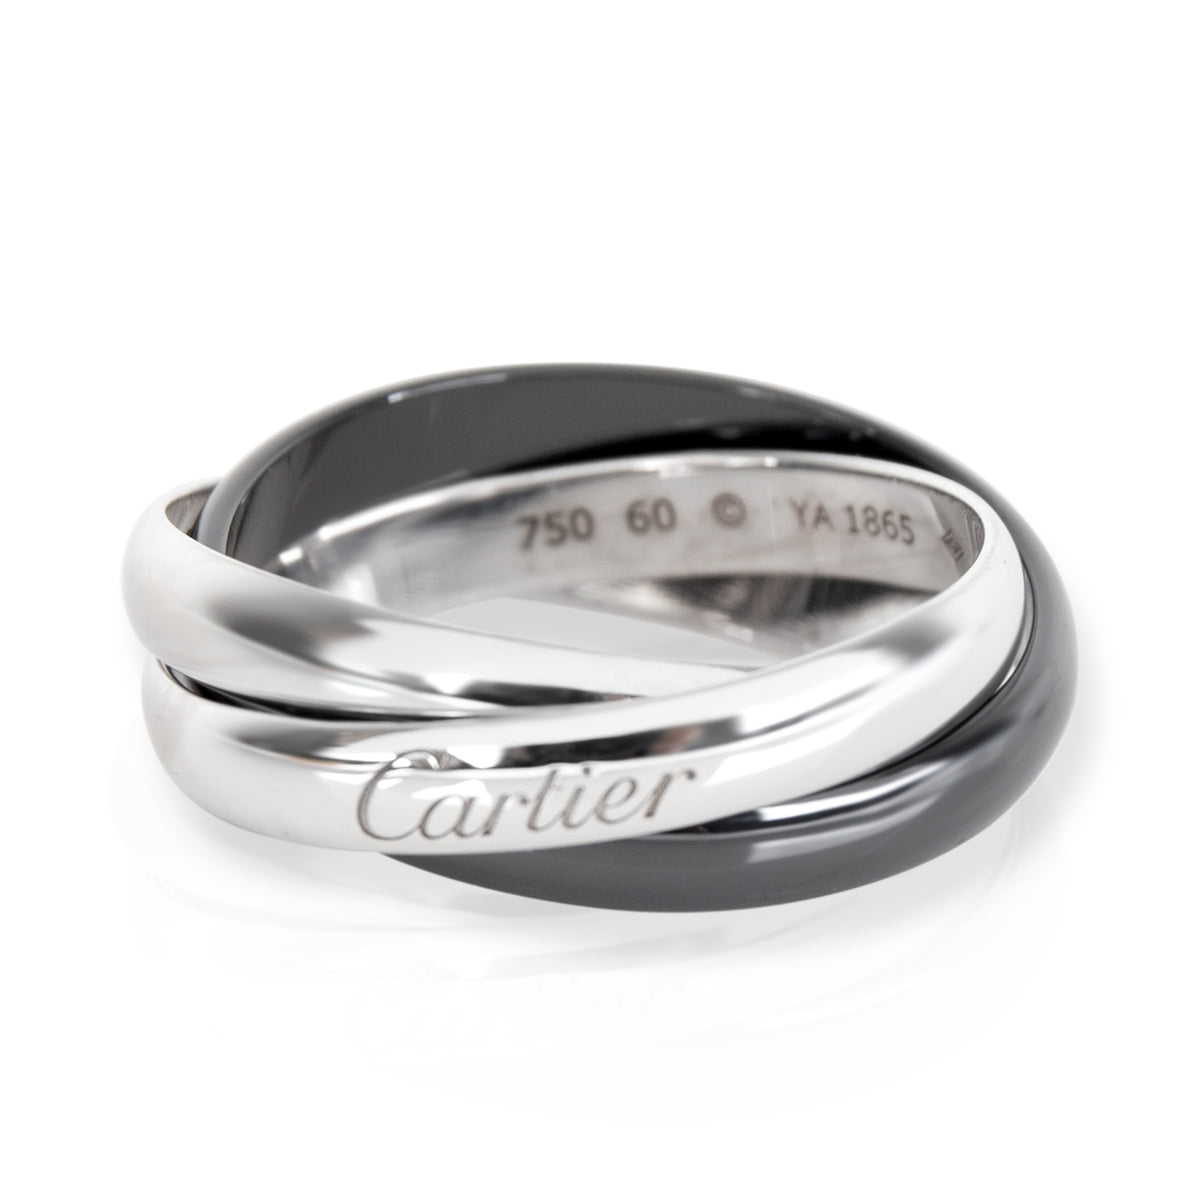 Cartier Trinity Ceramic Band in 18K White Gold